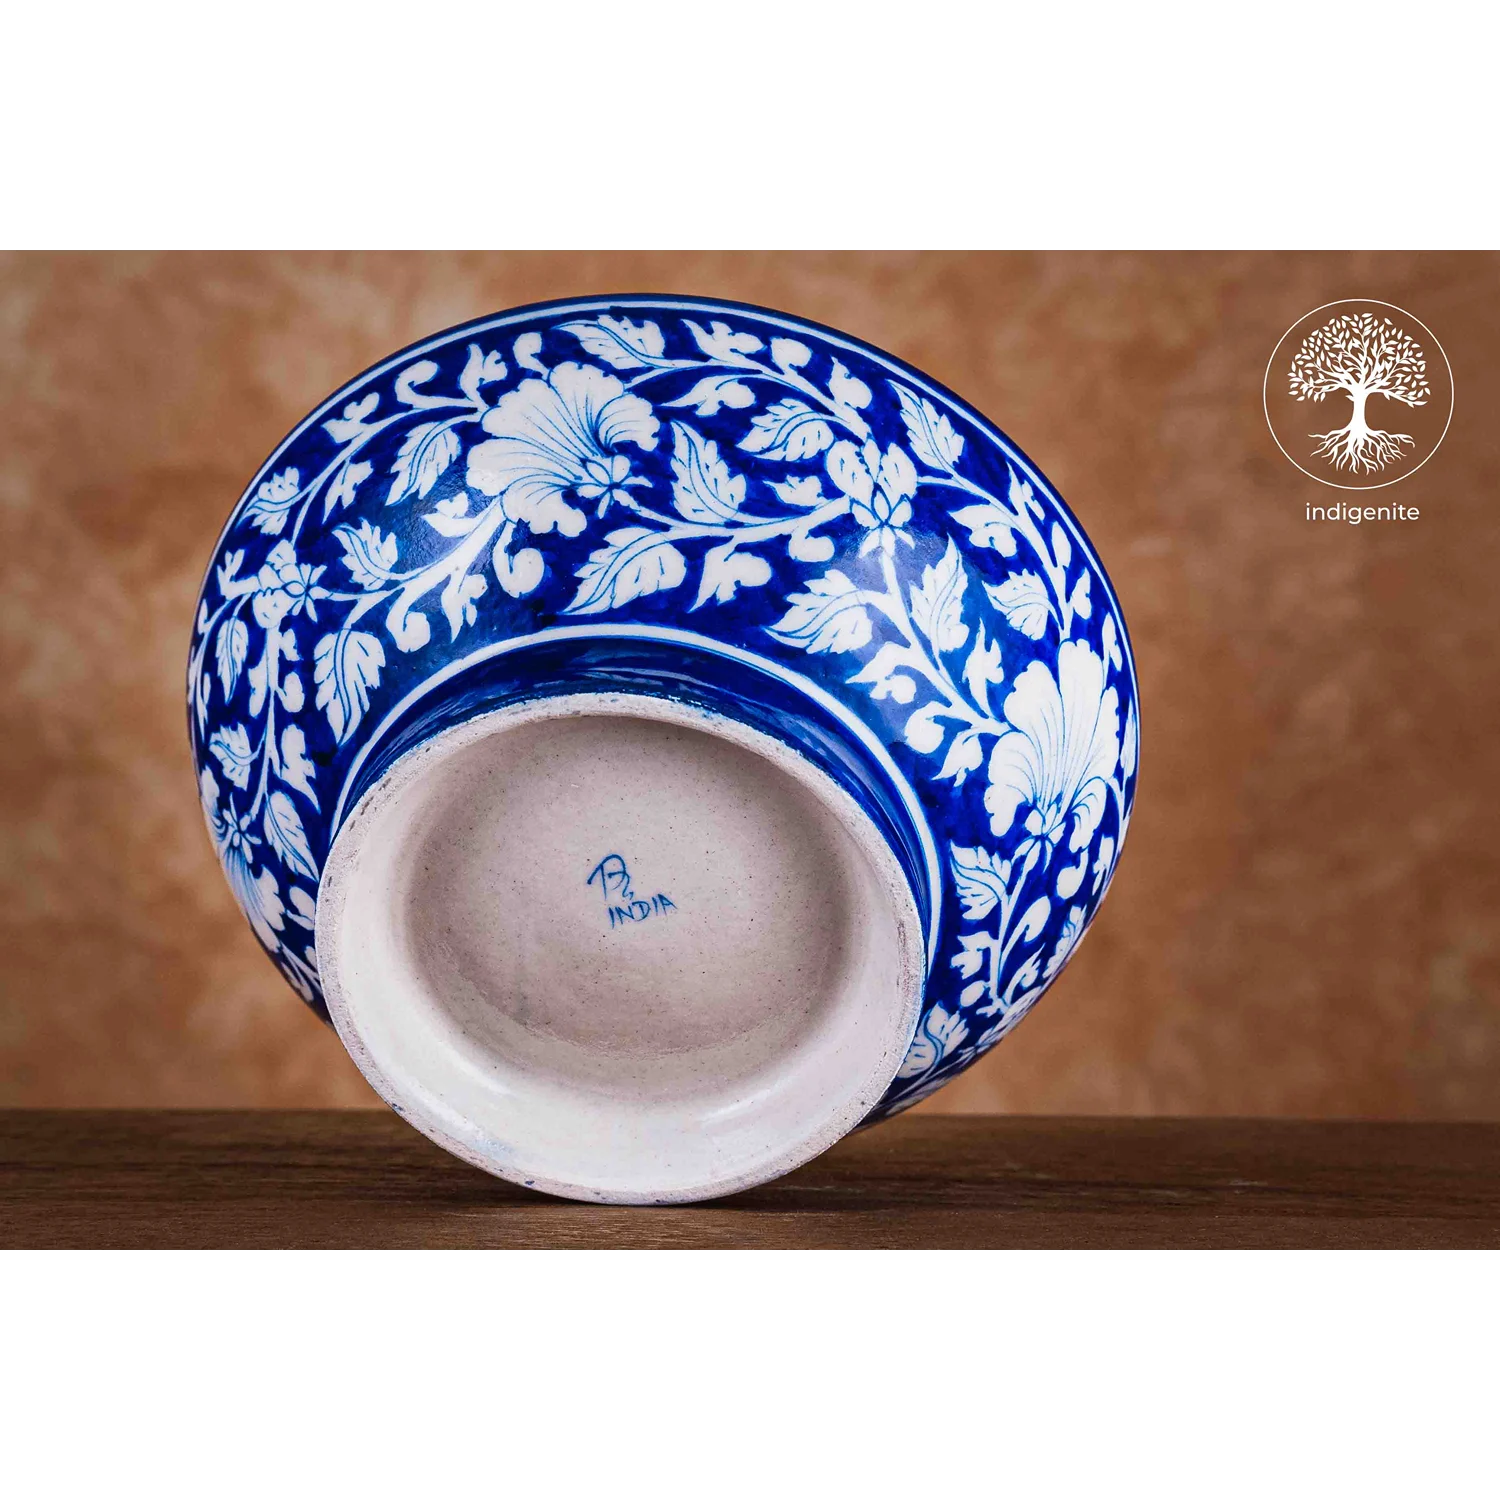 Midnight Blue and White Floral Bowl 8 Inches - Jaipur Blue Pottery